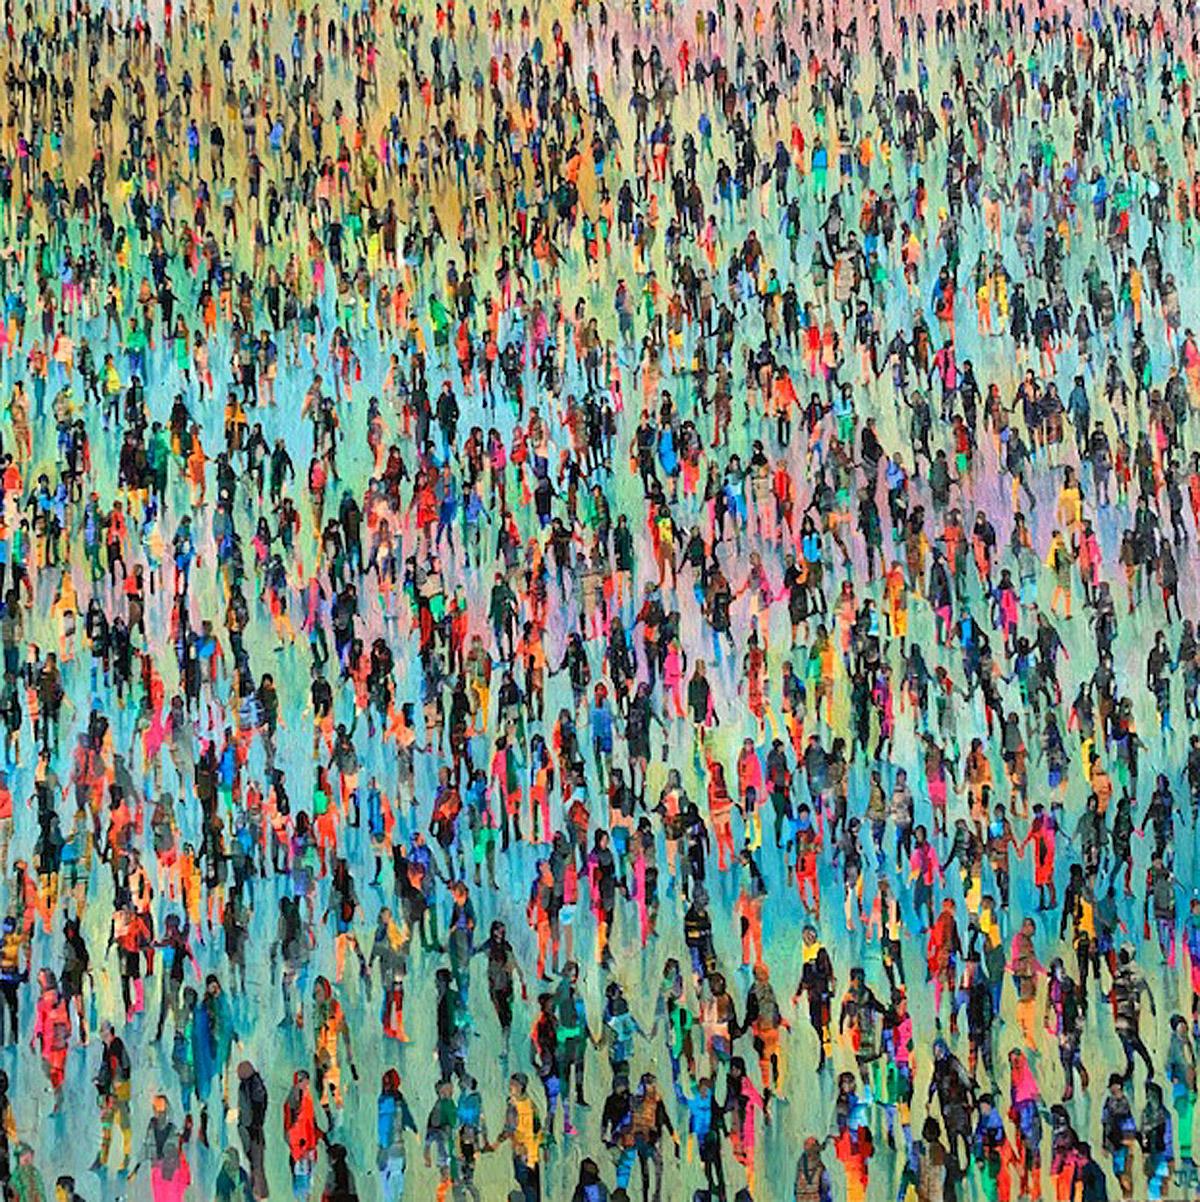 Julia Whitehead Figurative Painting - All the Colours - Figurative Crowd Scene: Figurative Oil Painting on Canvas